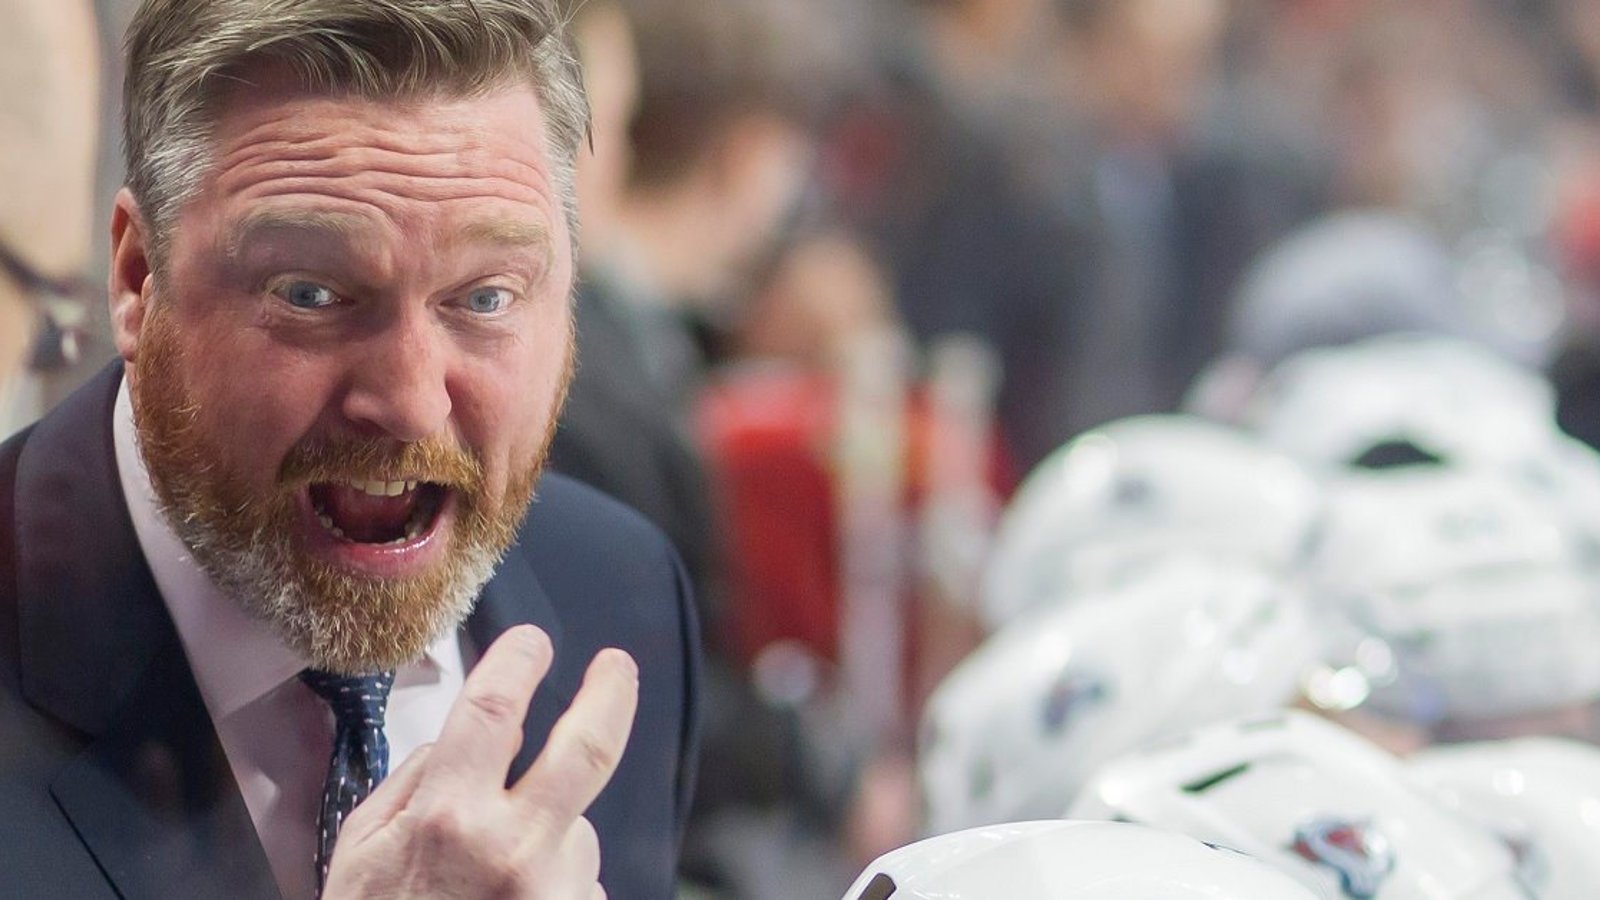 The real reason Patrick Roy quit the team revealed!